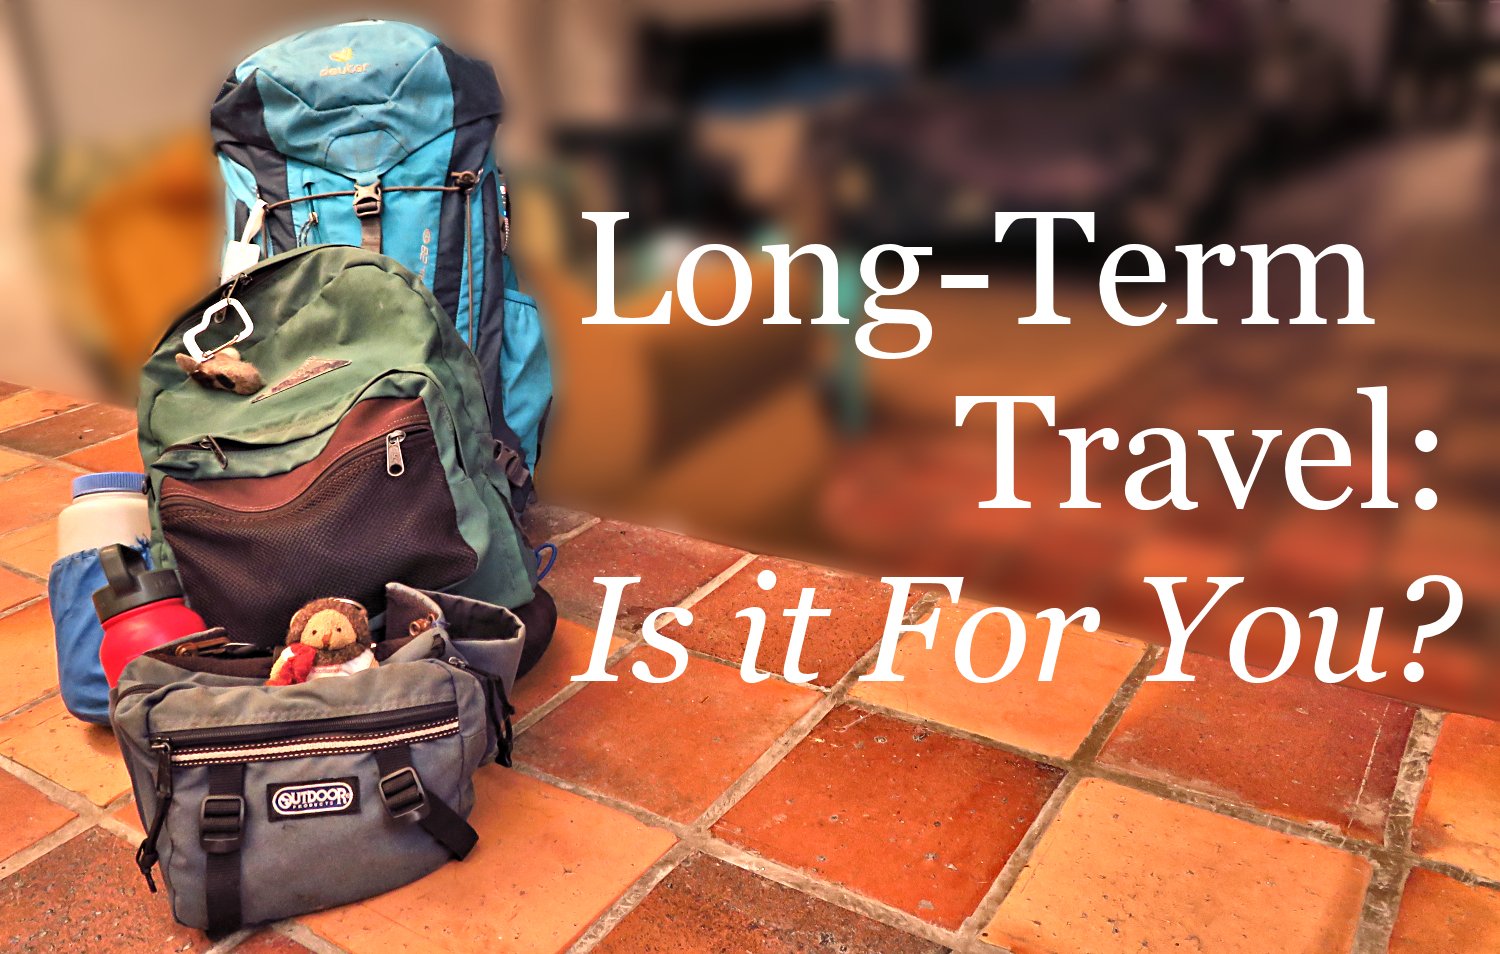 Long Term Travel: Is it For You? Image of packs ready for traveling.